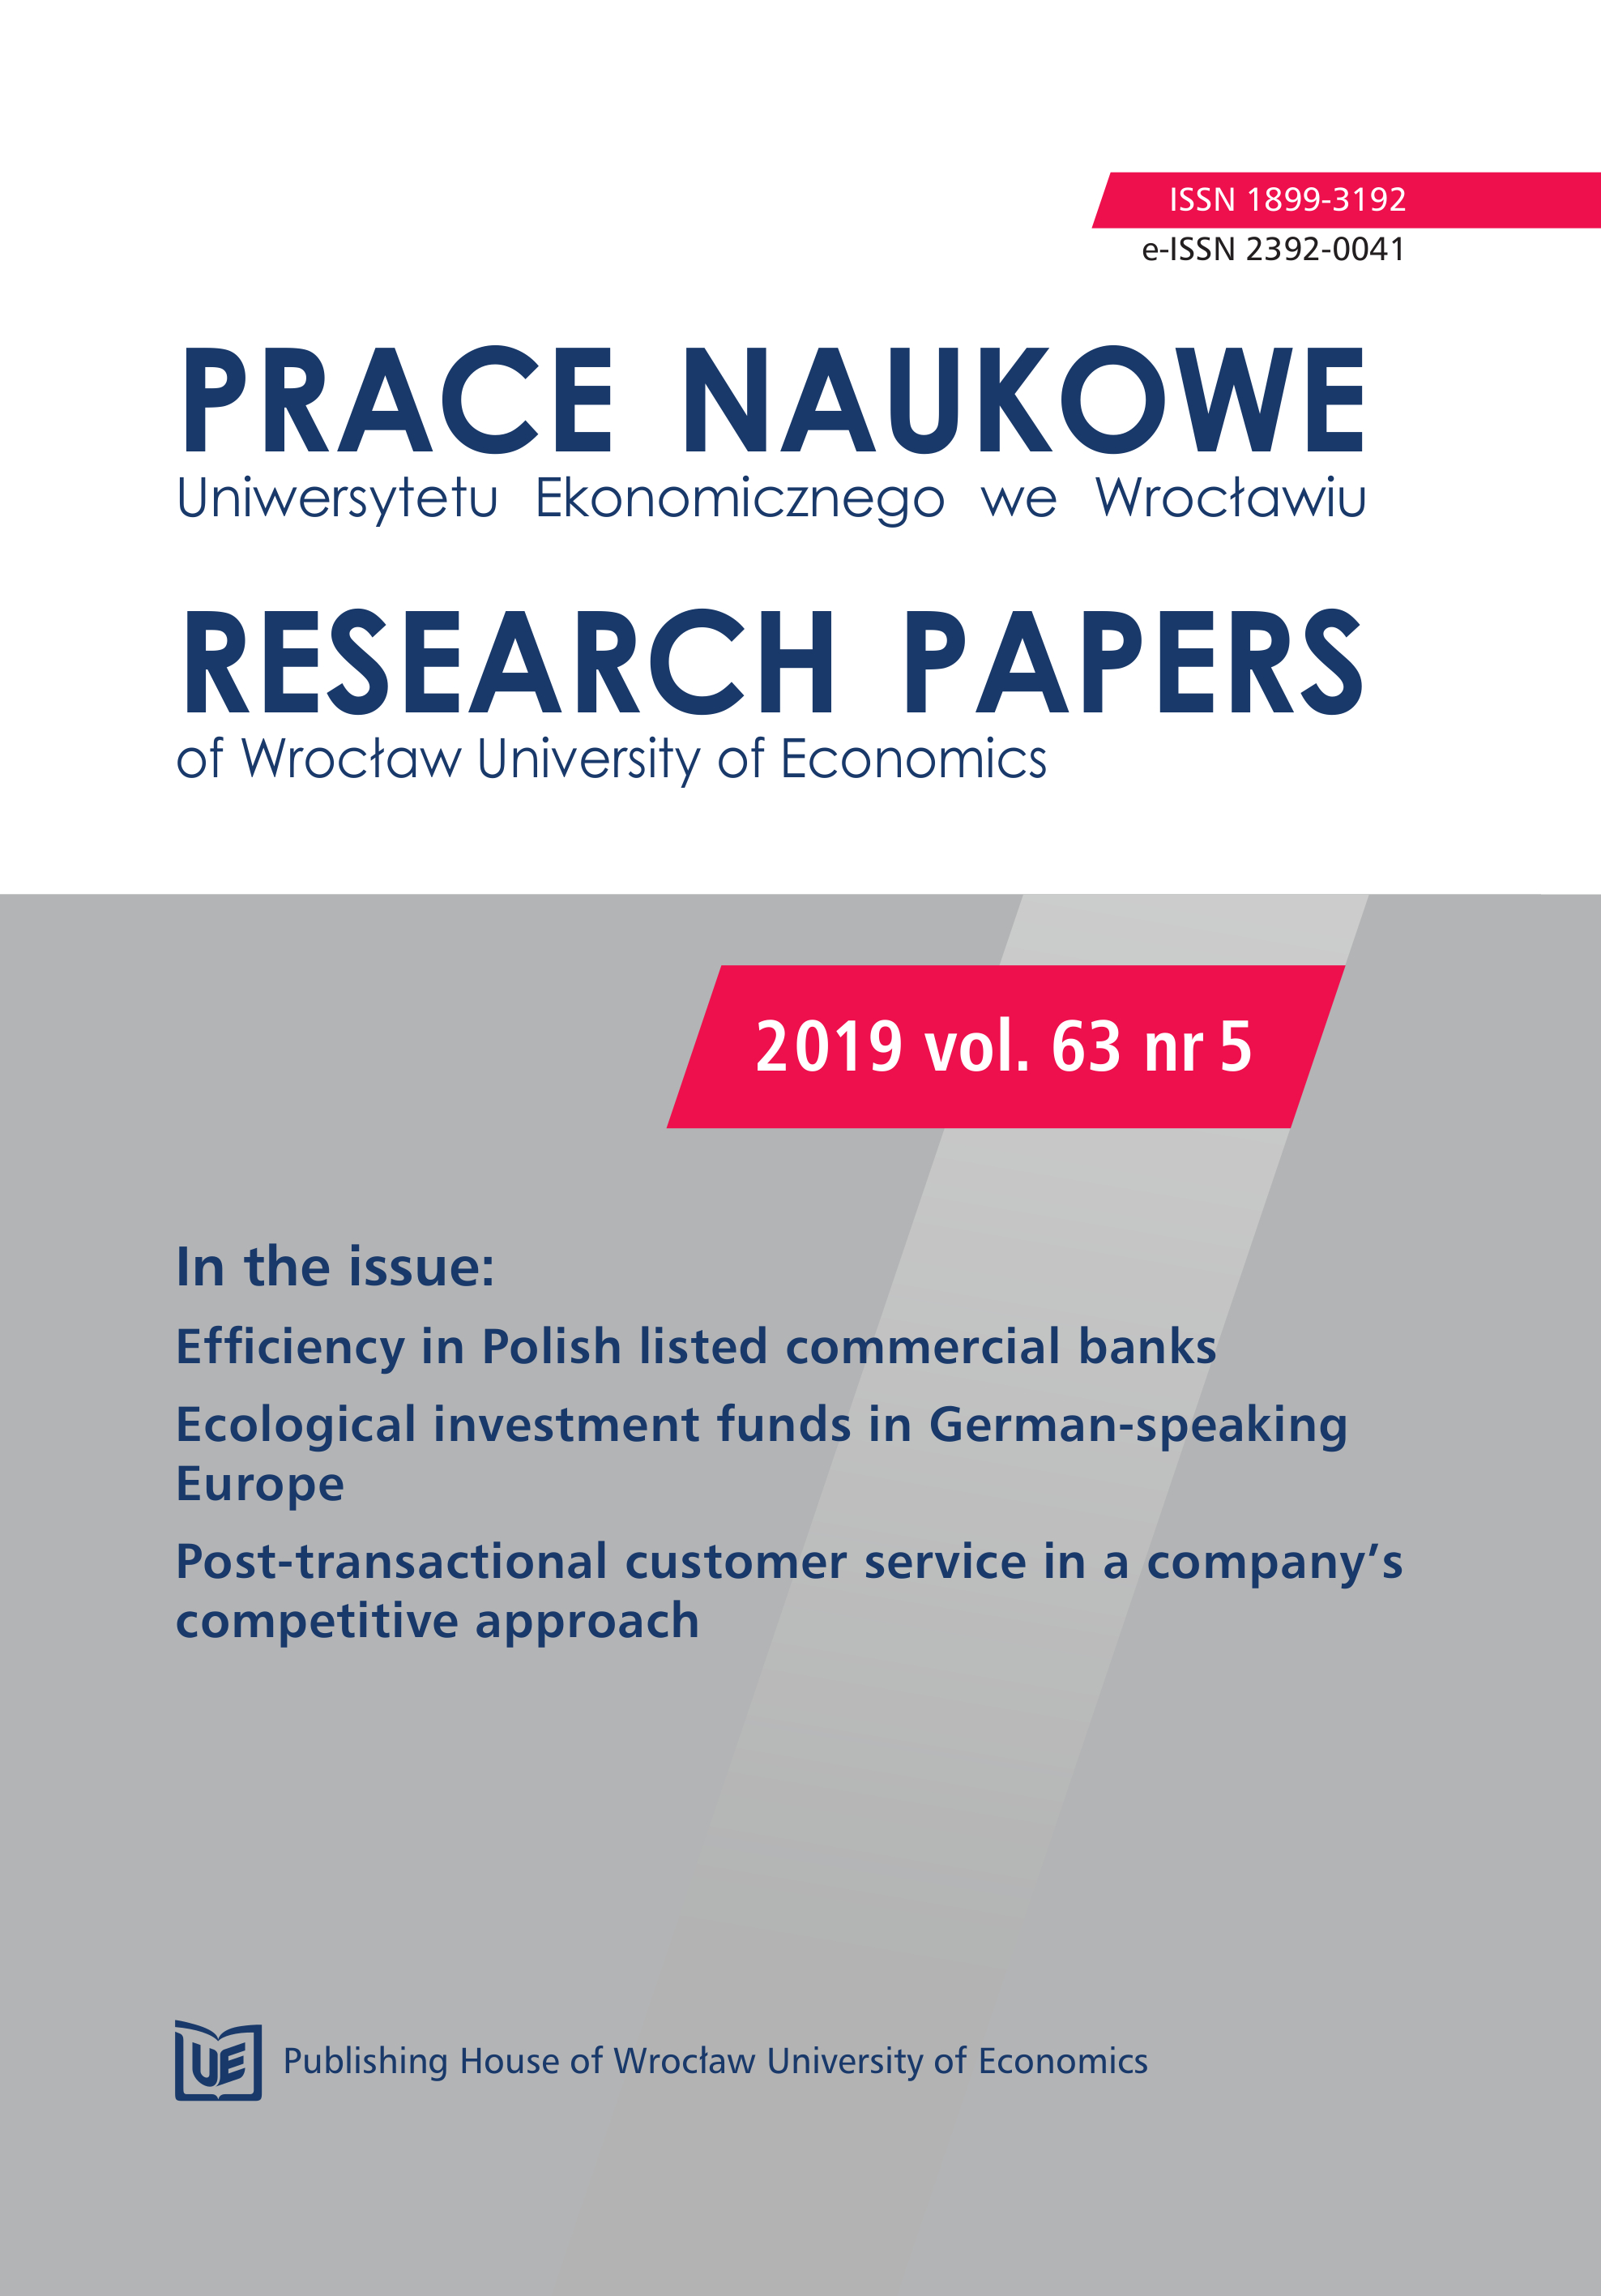 Post-transactional customer service in a company’s competitive approach – results of the study Cover Image